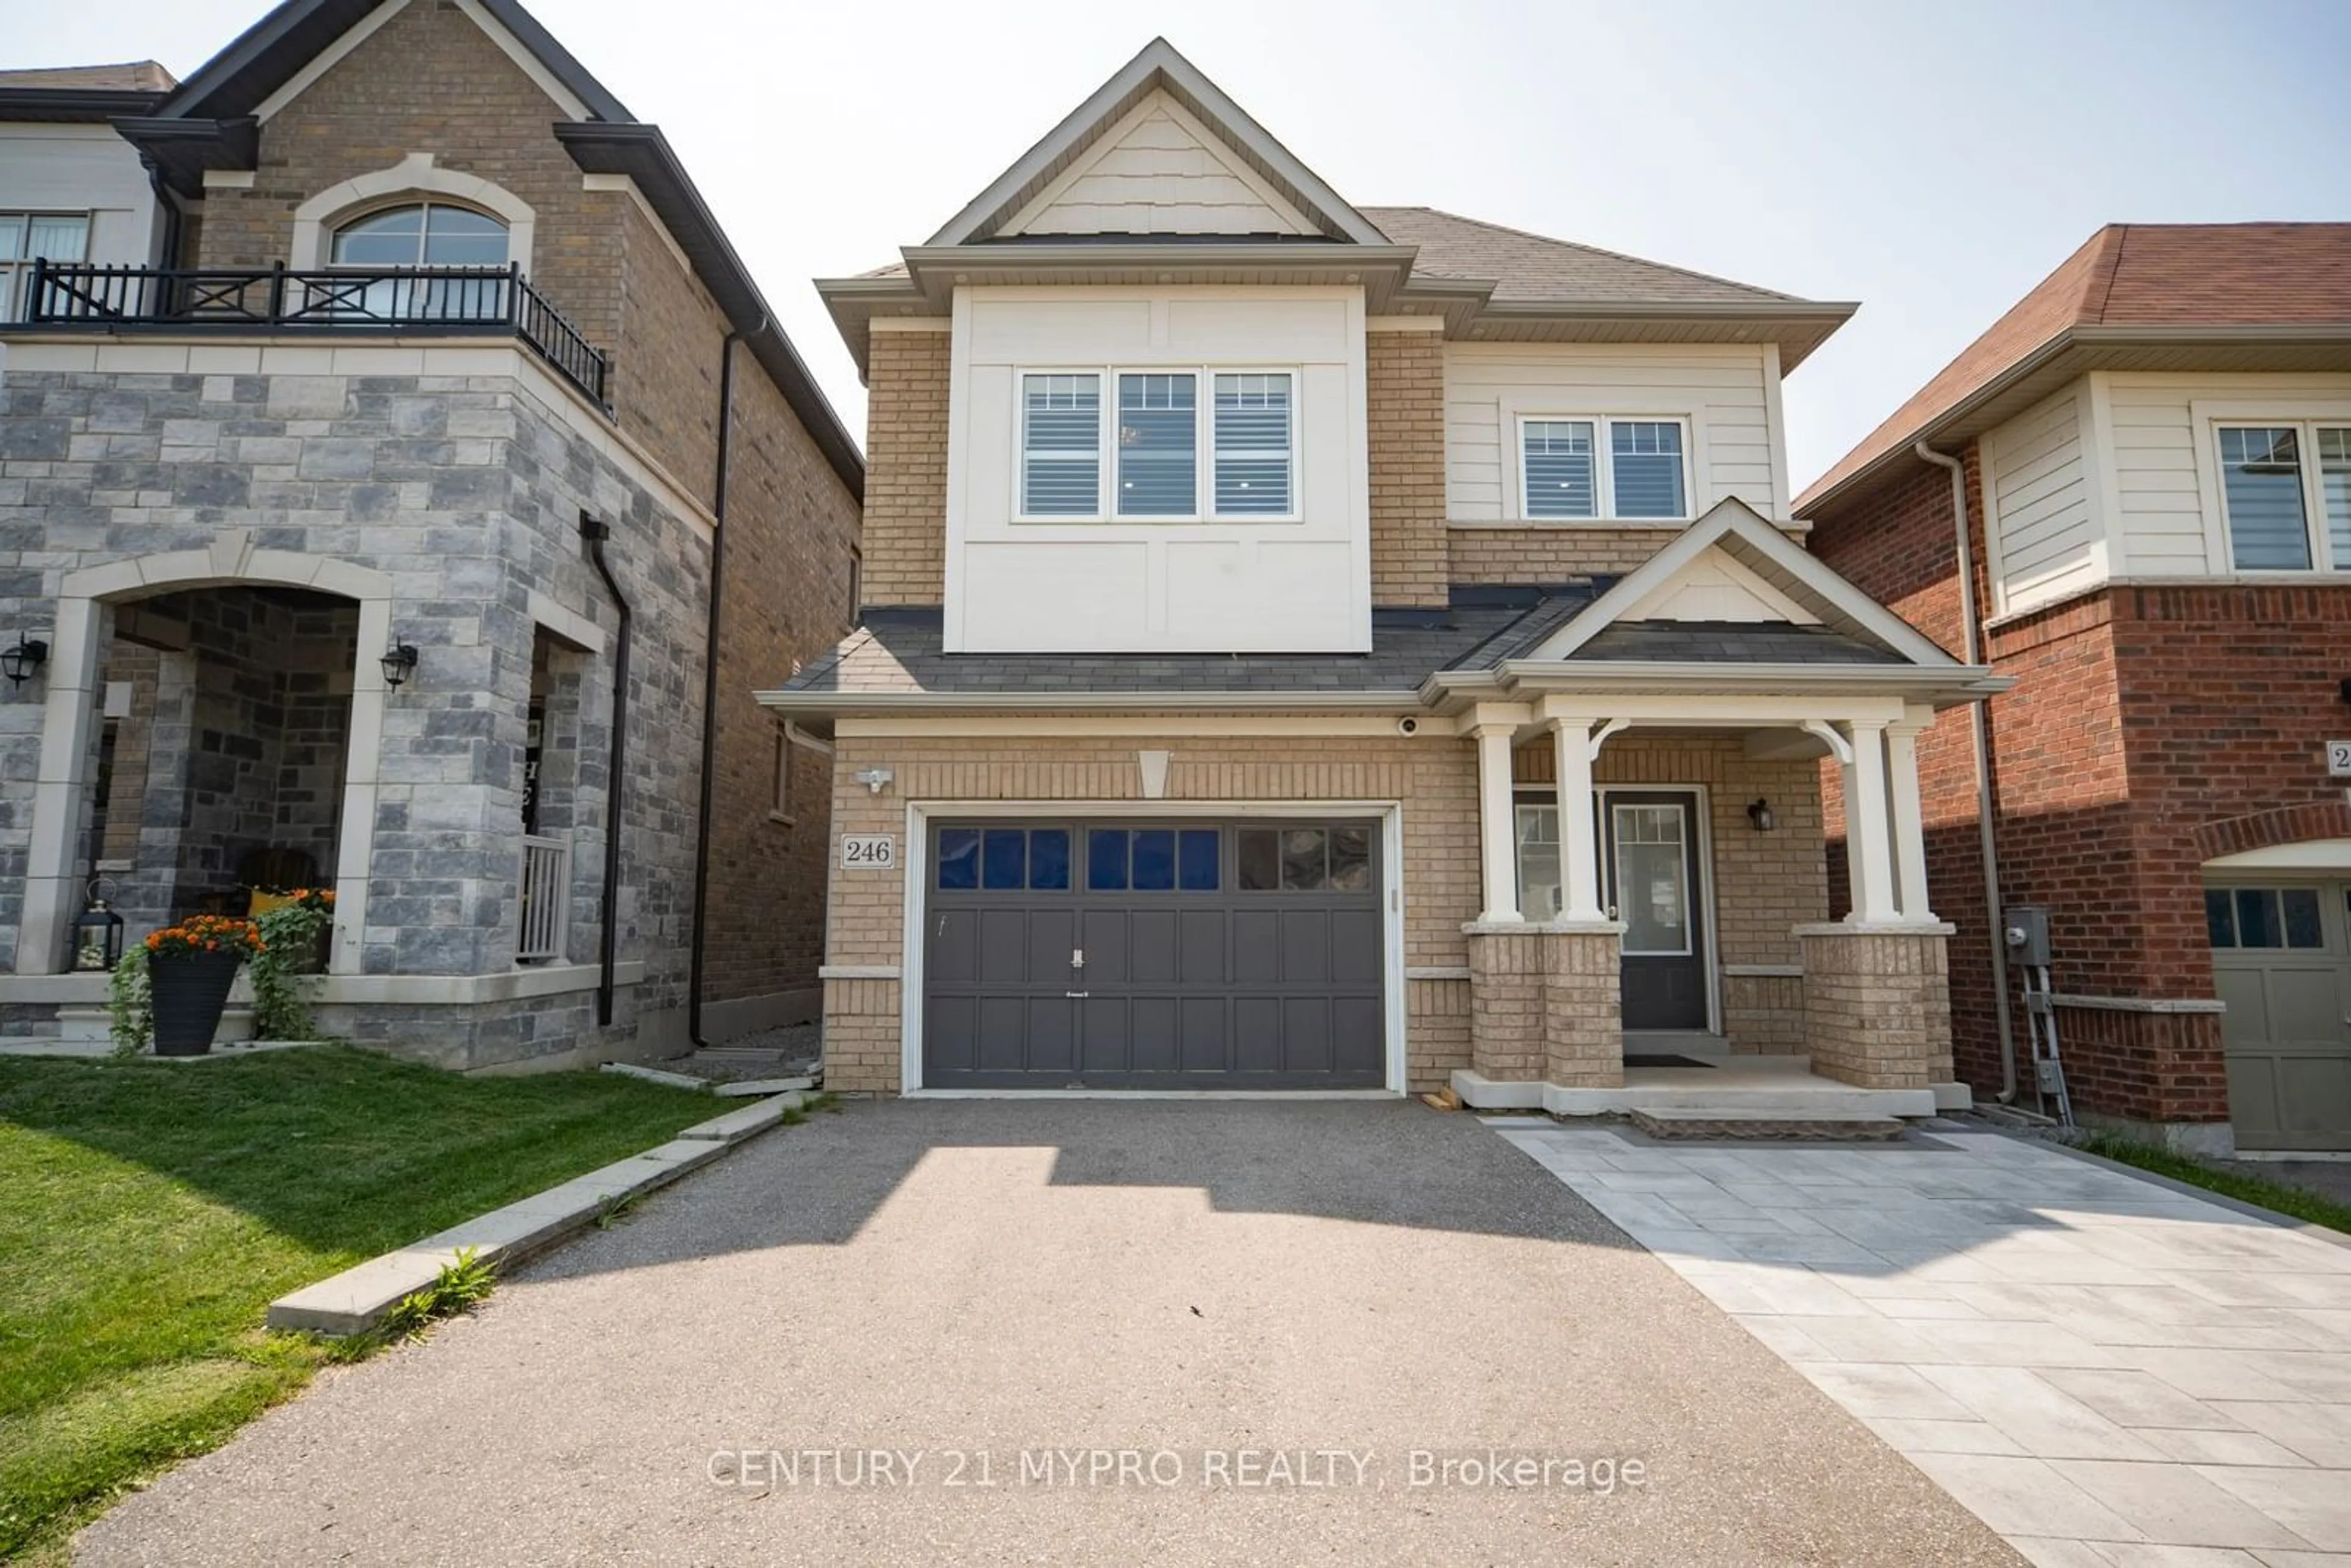 Home with brick exterior material for 246 Sharon Creek Dr, East Gwillimbury Ontario L9N 0P5